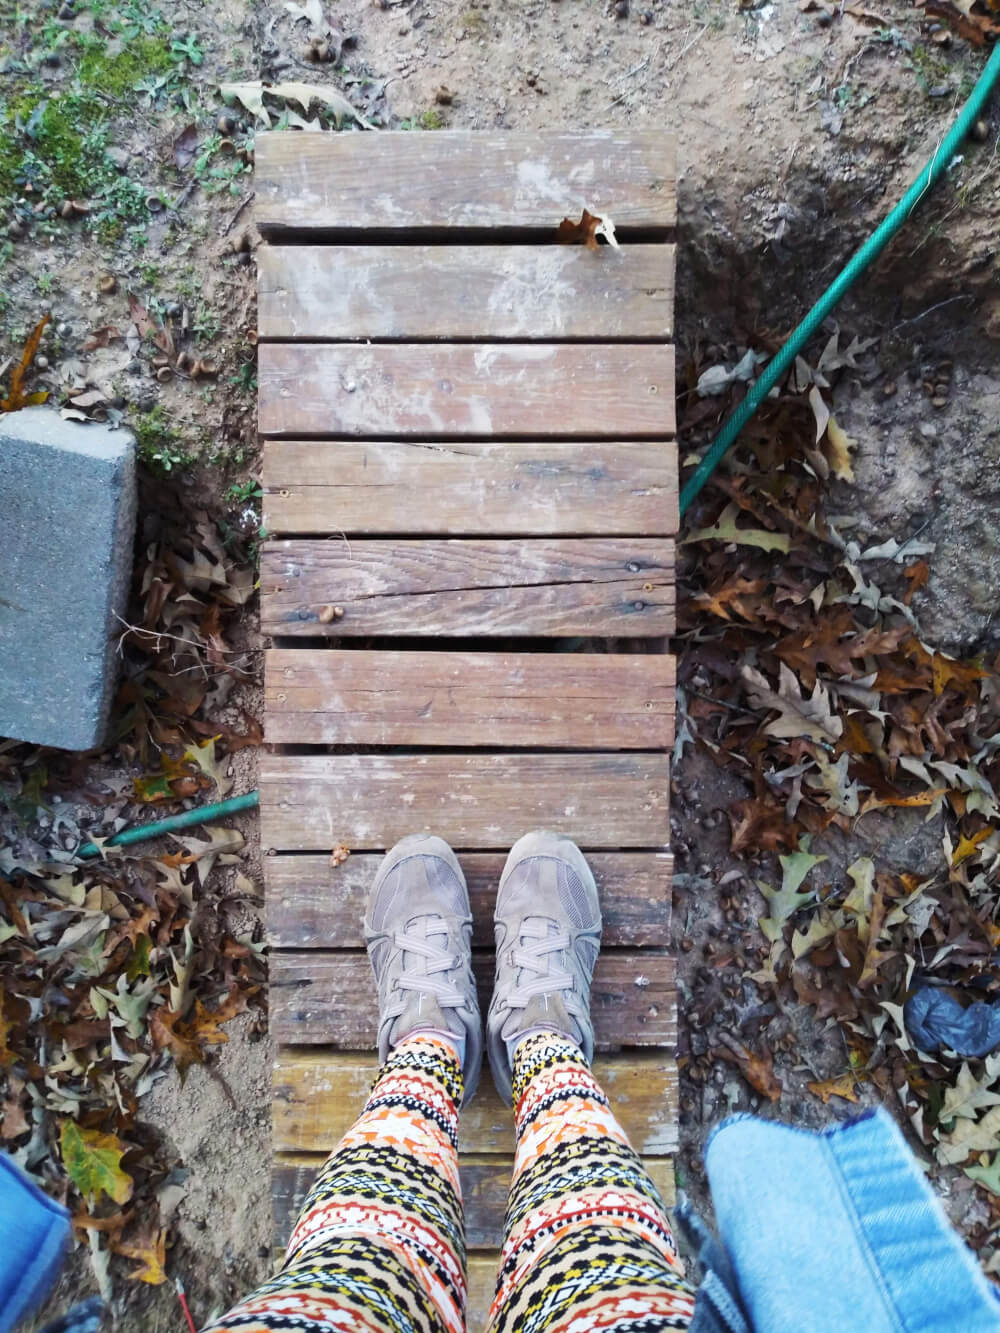 From where I stand on a small, DIY wooden bridge